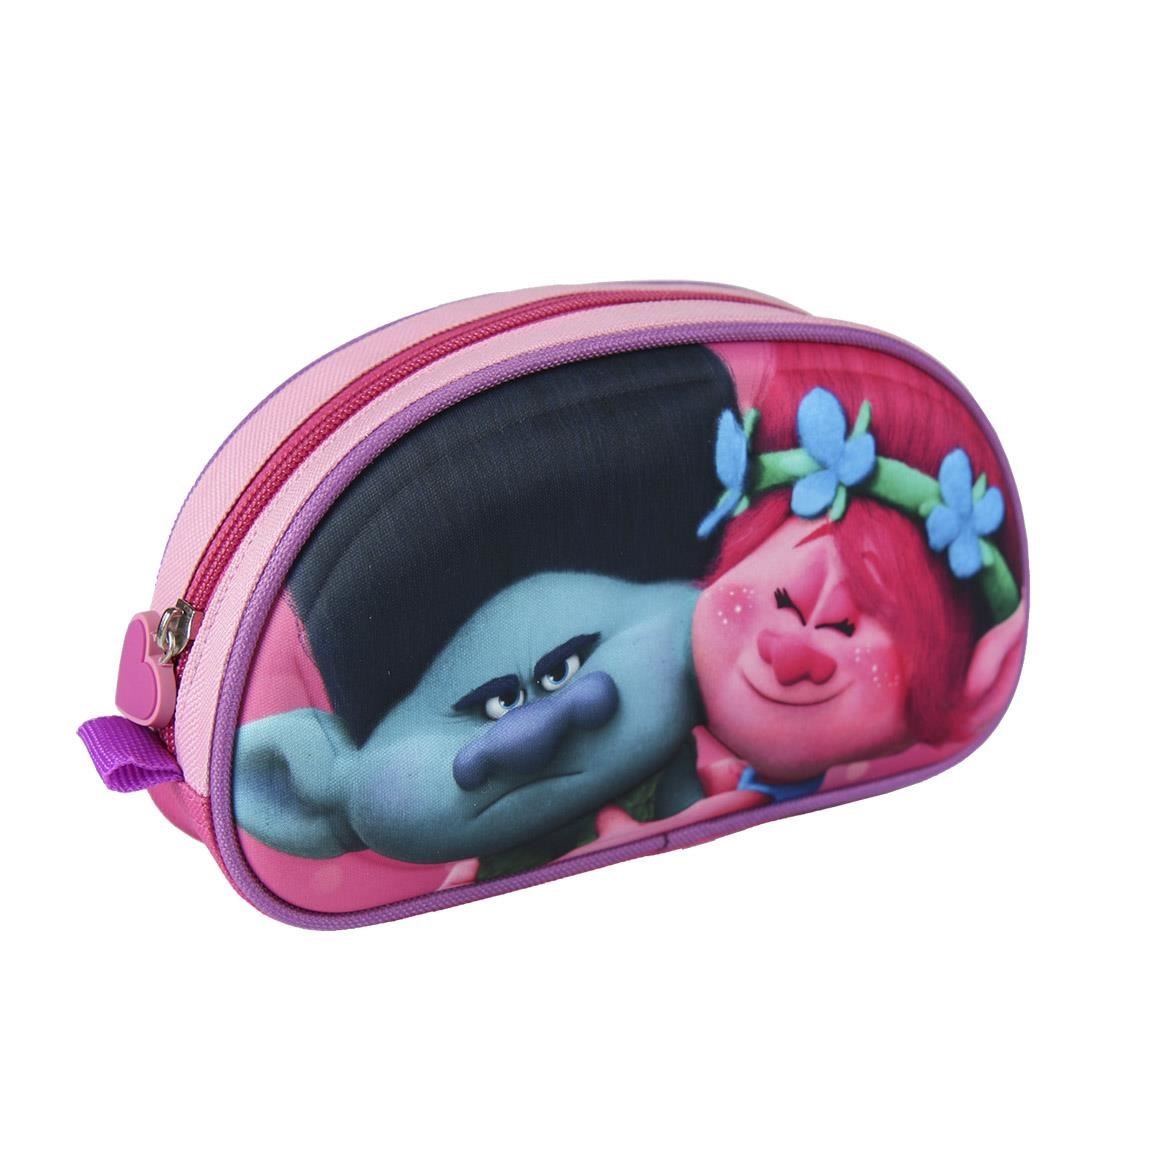 Trolls Princess Poppy & Branch Oval Shaped Pink Pencil Case For Children